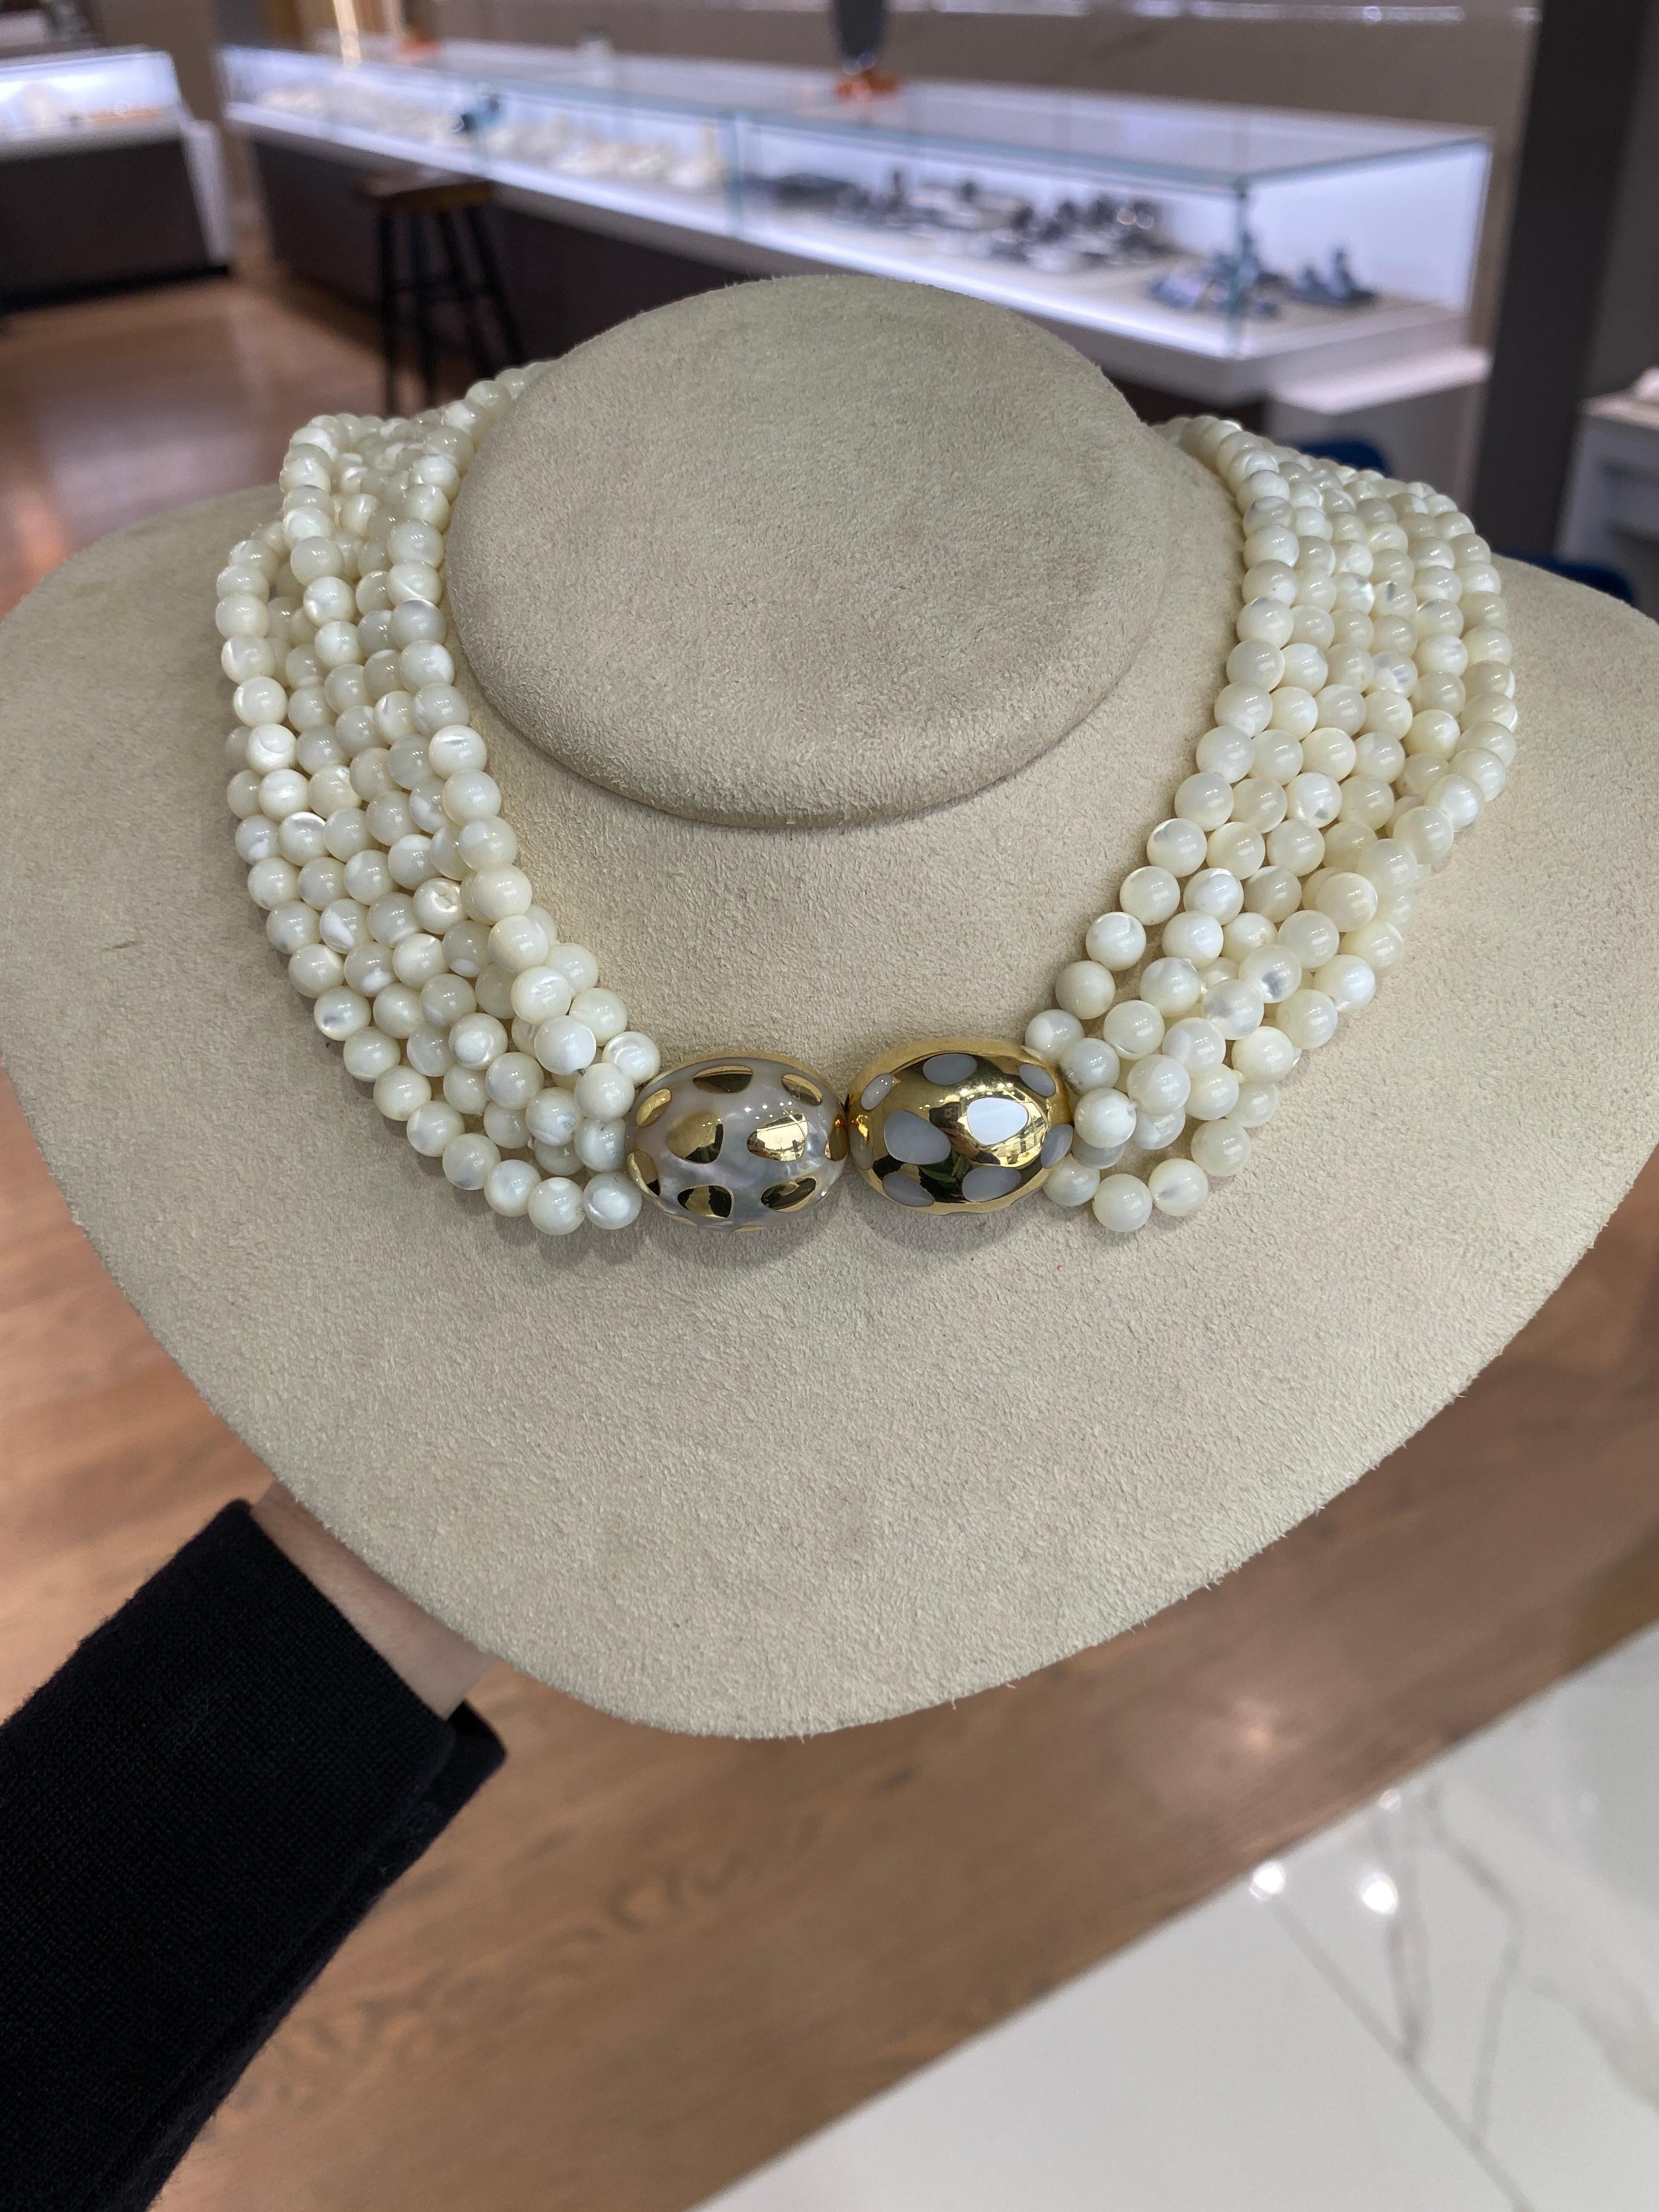 Tiffany & Co Angela Cummings Mother Of Pearl Bead Torsade Inlaid Necklace In Excellent Condition For Sale In Houston, TX